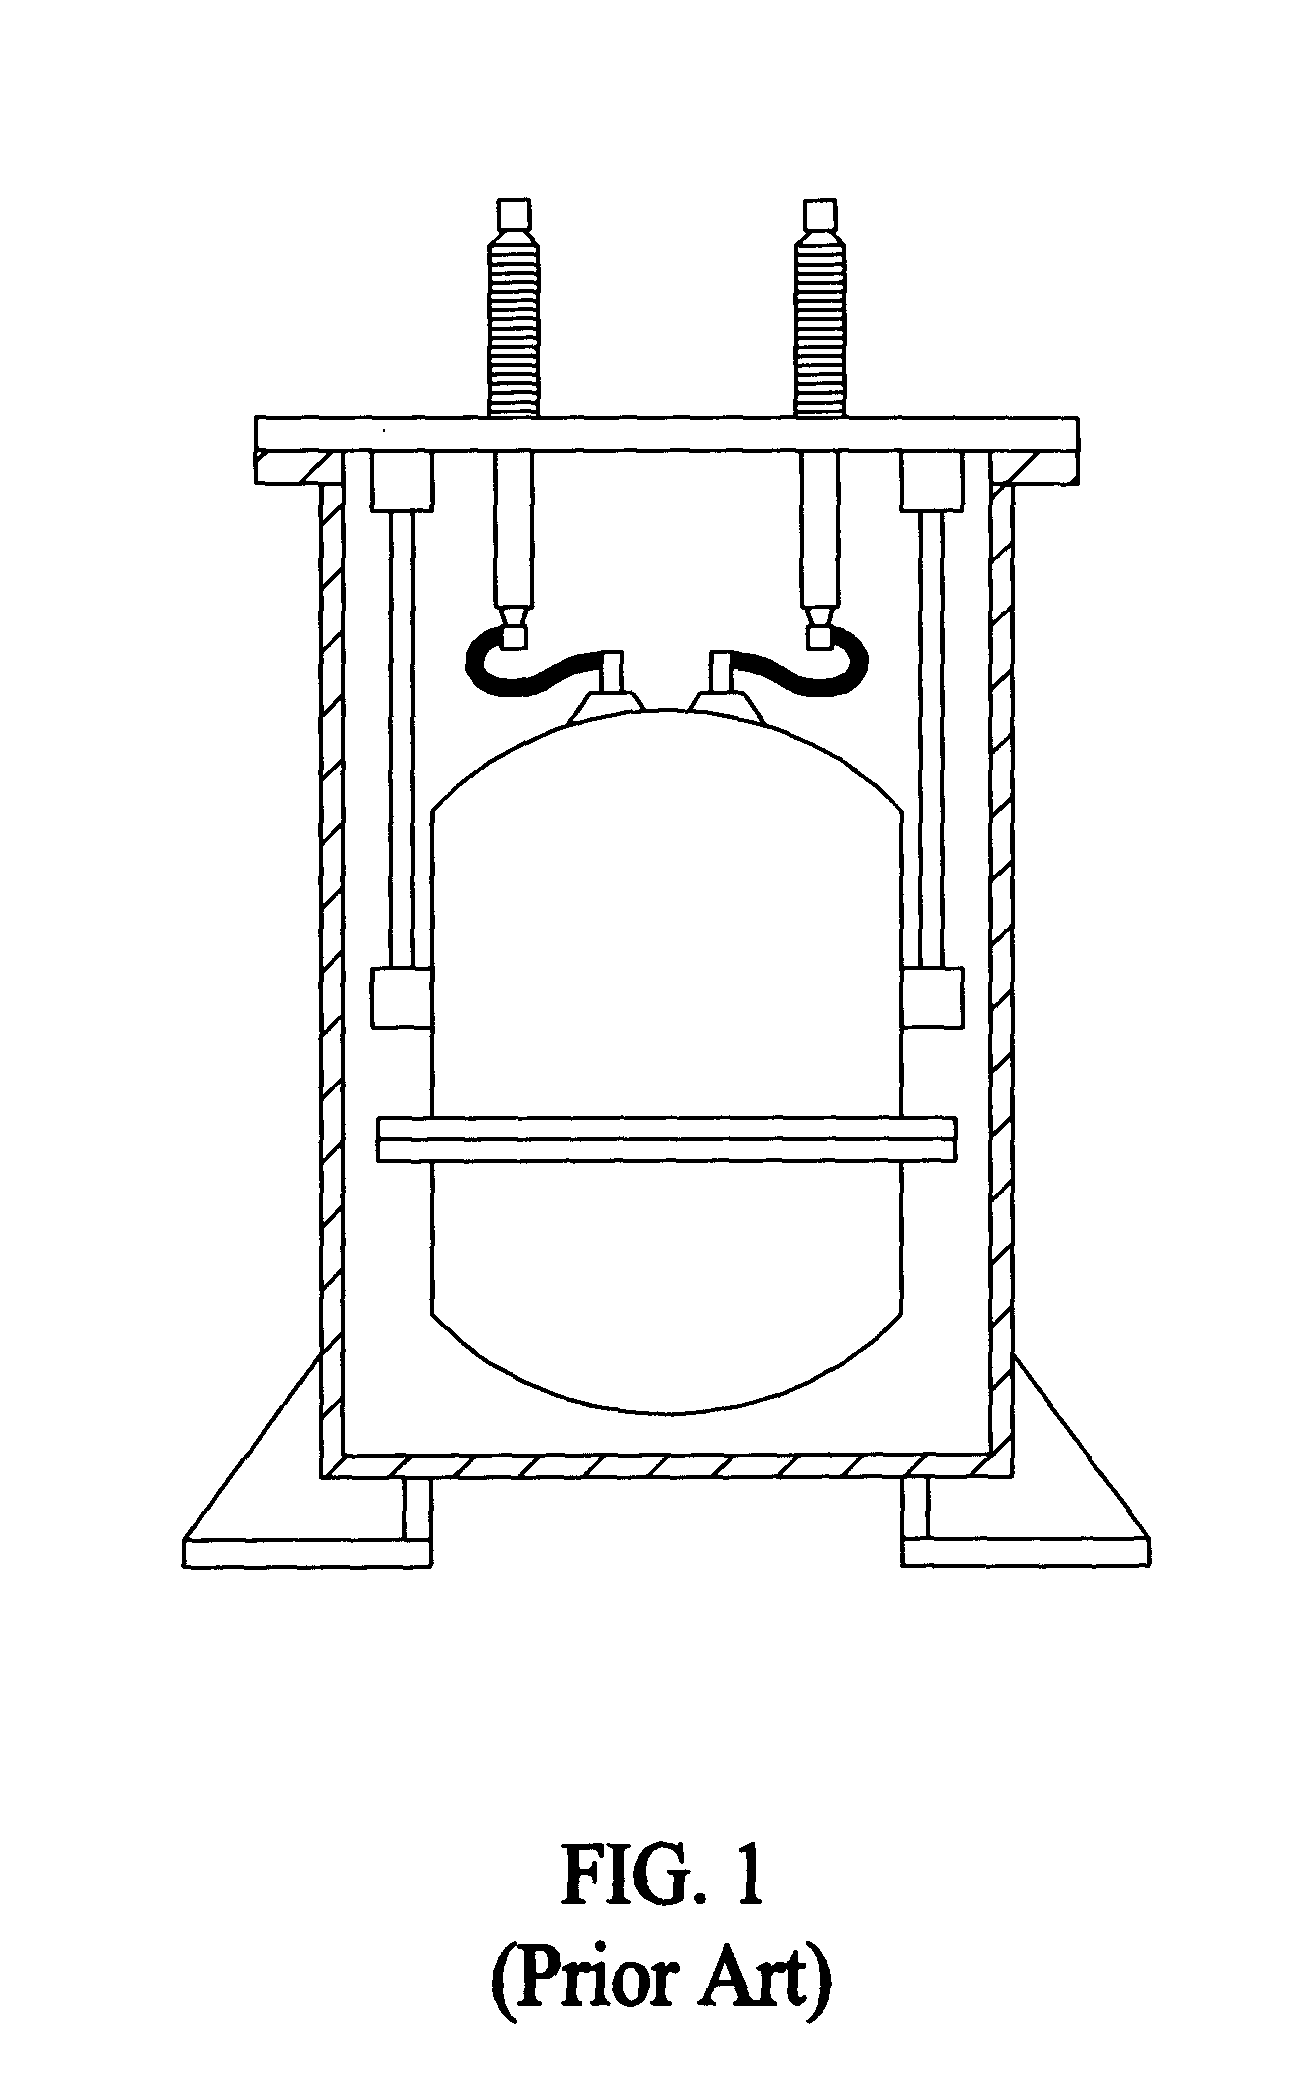 Mechanical support system for devices operating at cryogenic temperature